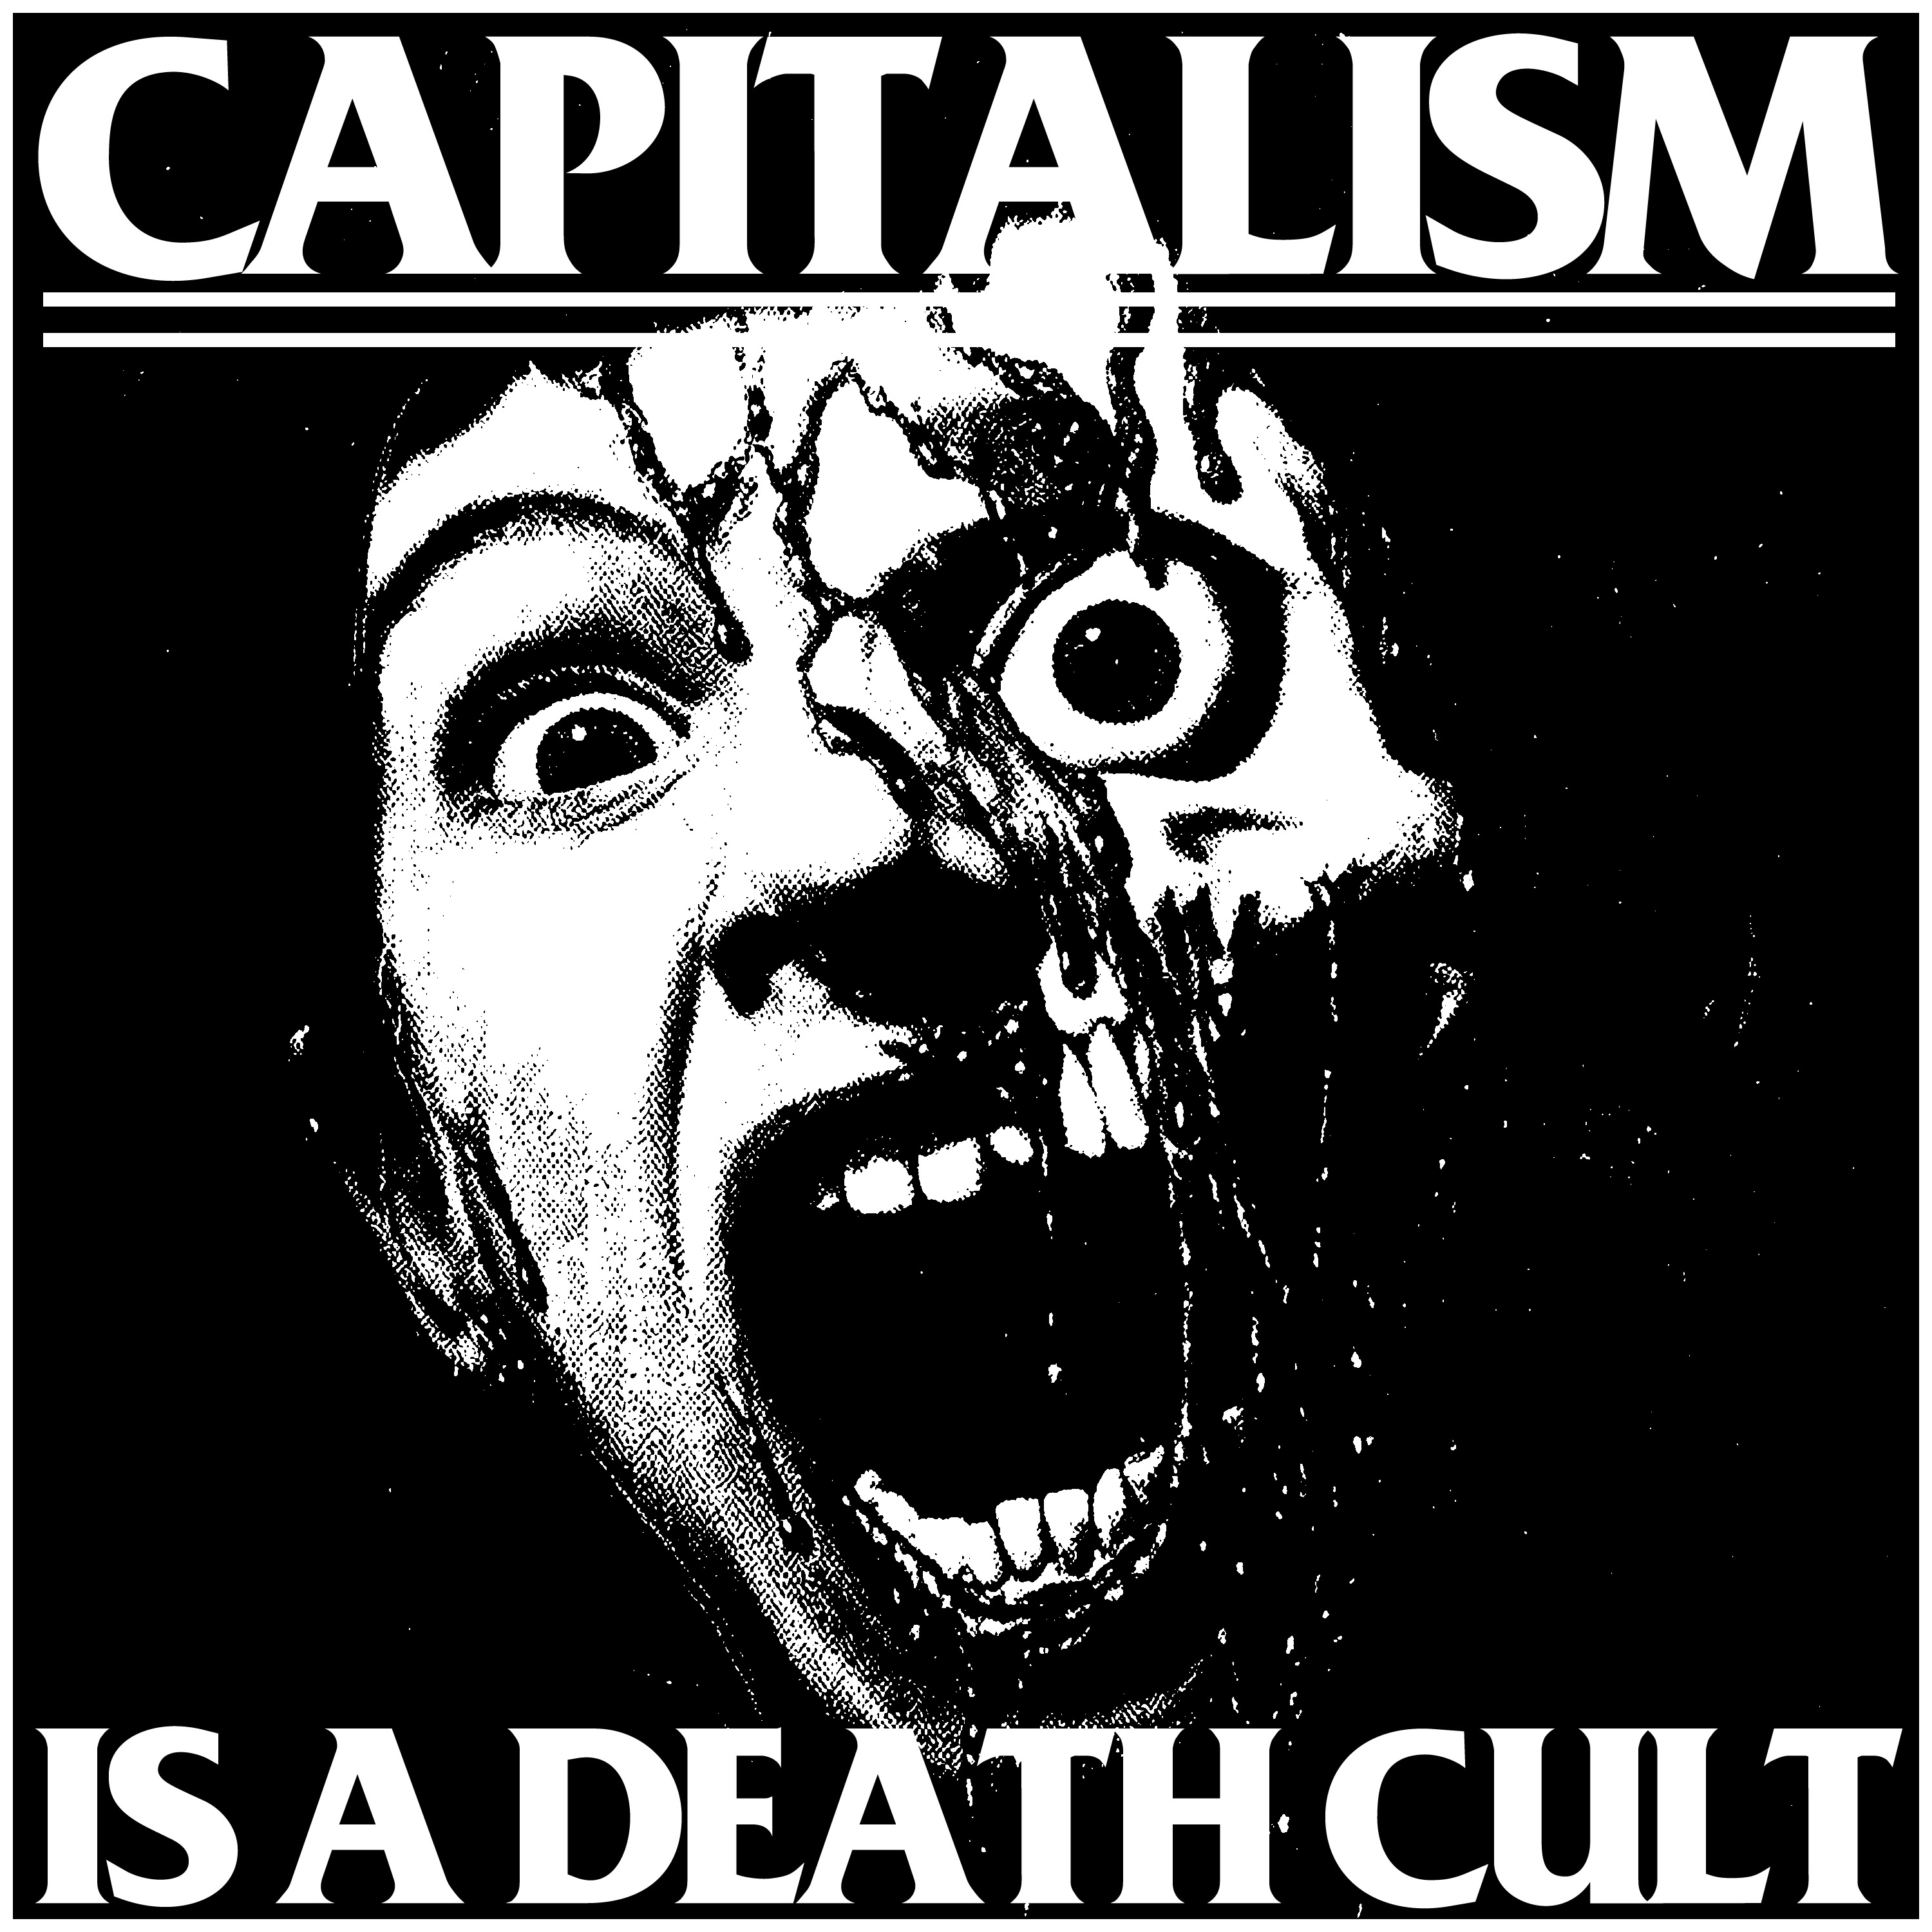 Capitalism is Death Cult